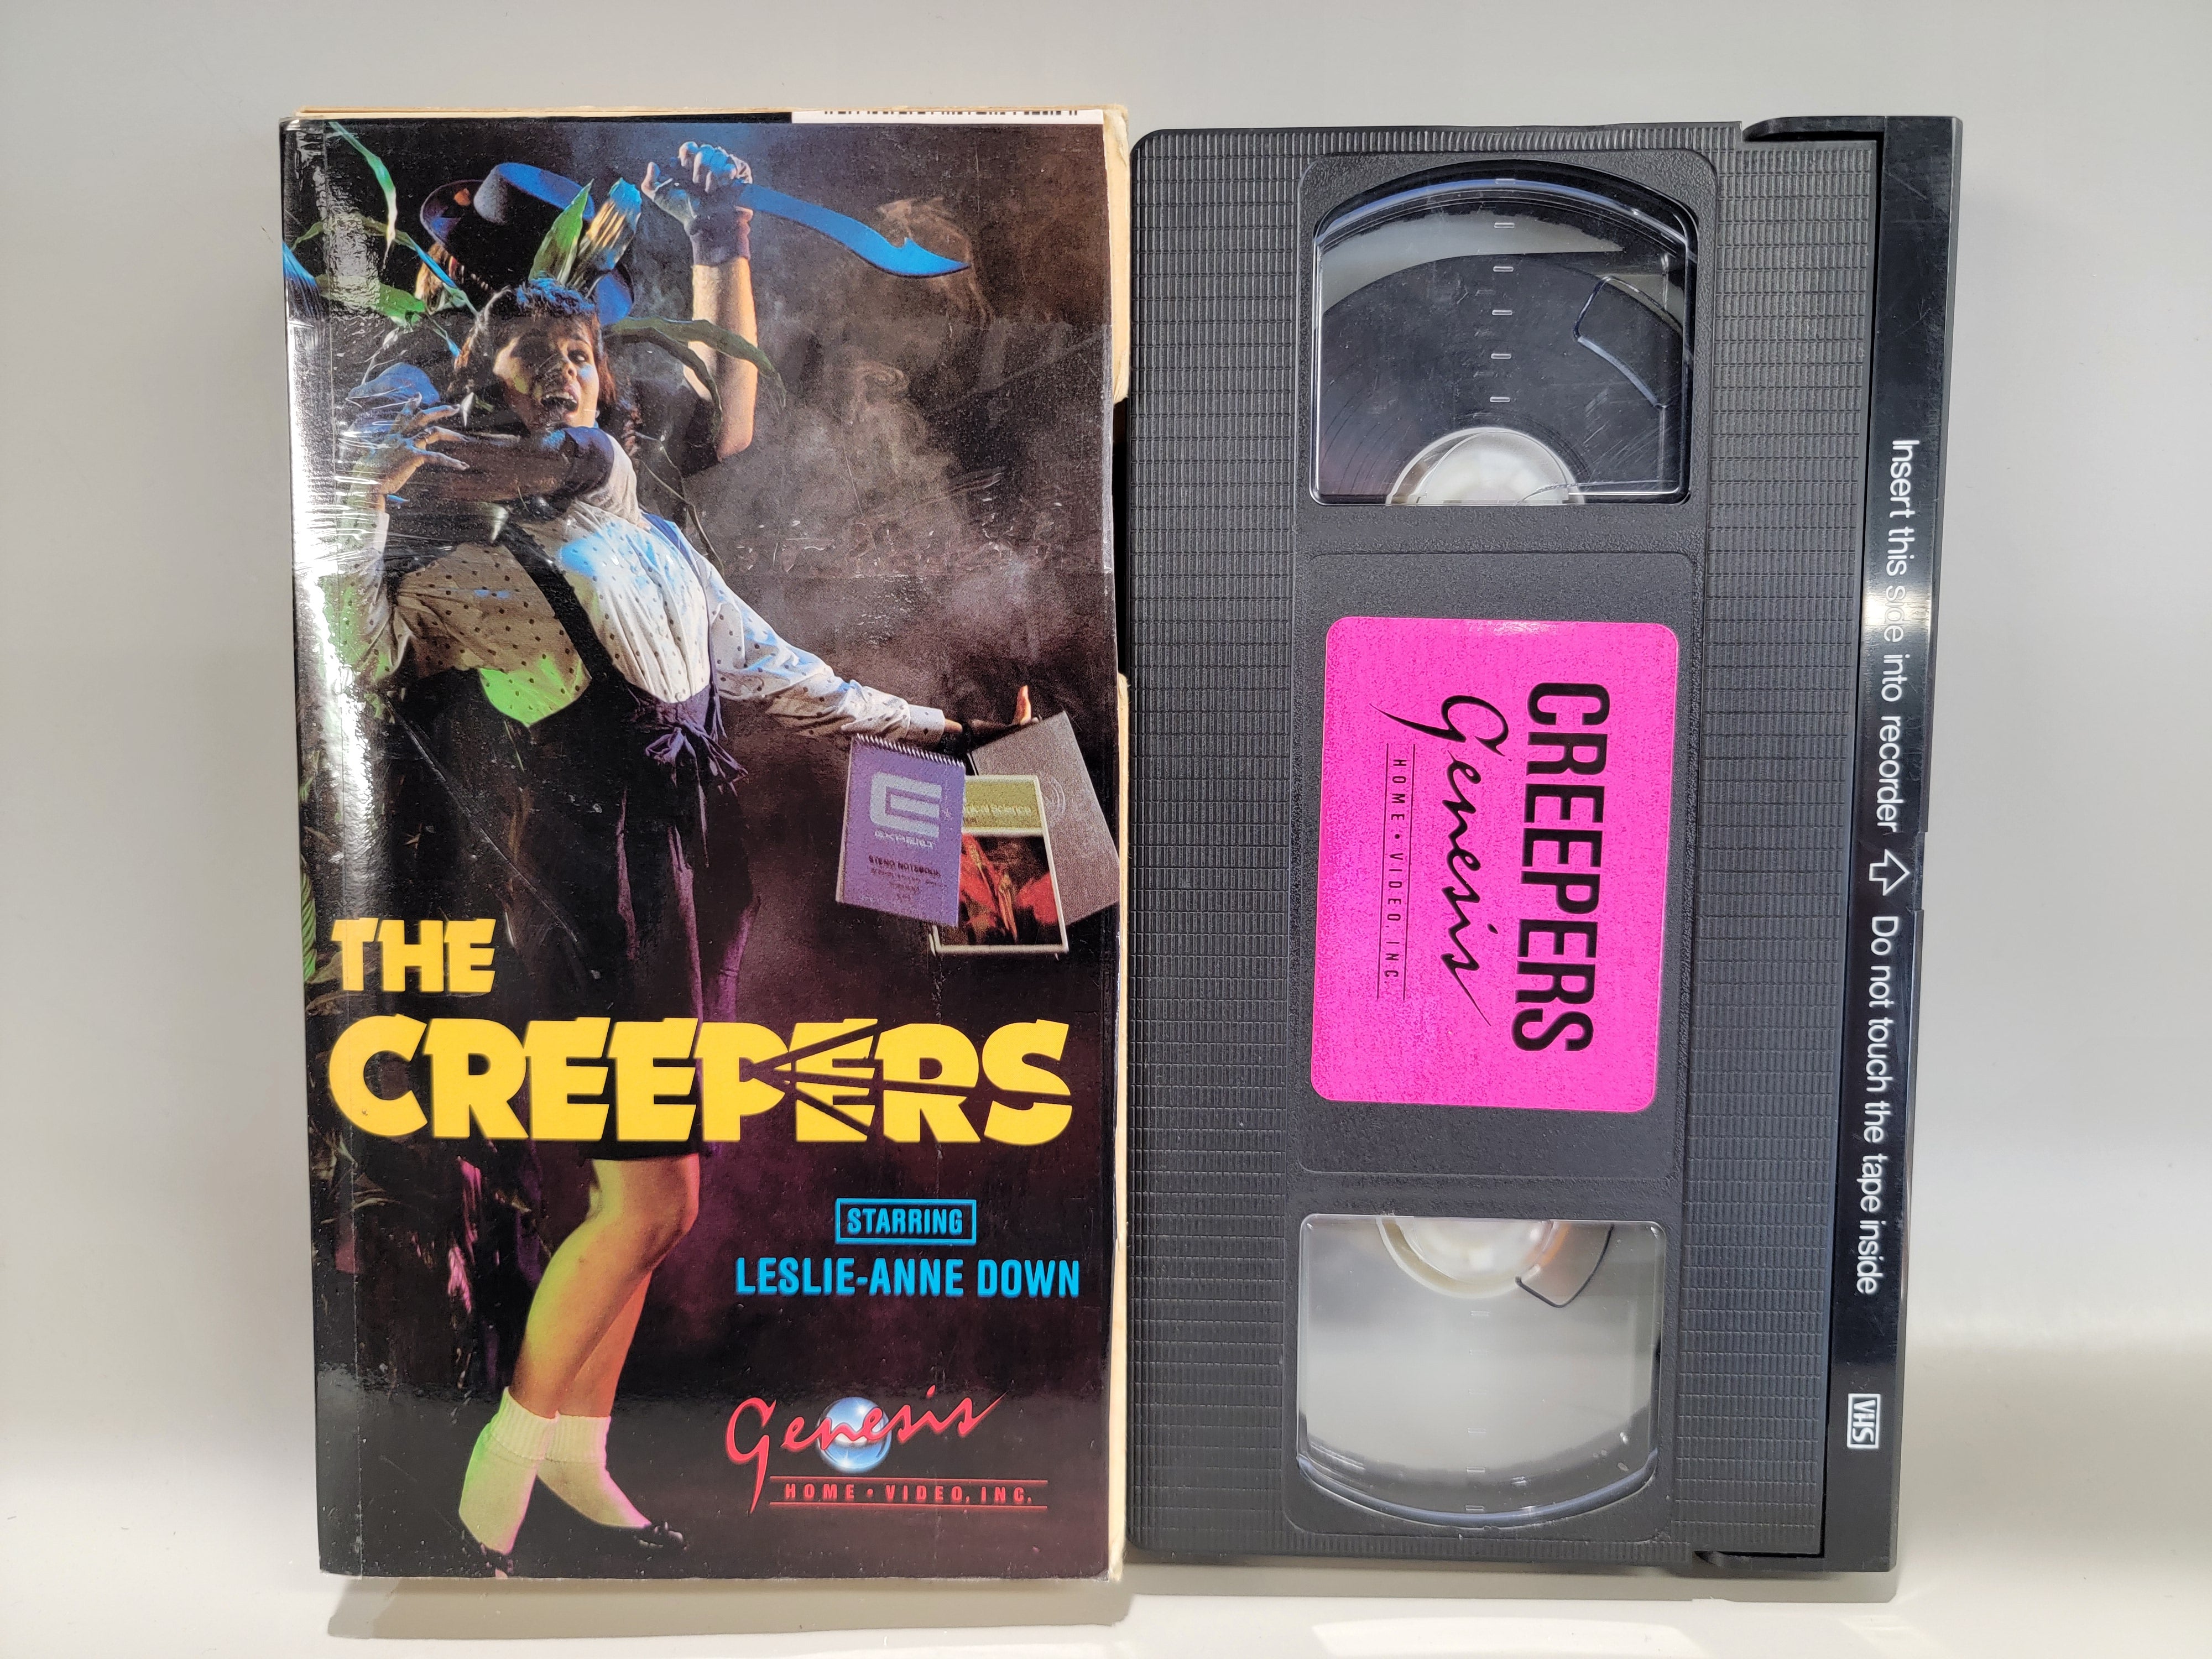 THE CREEPERS (CUT BOX) VHS [USED]